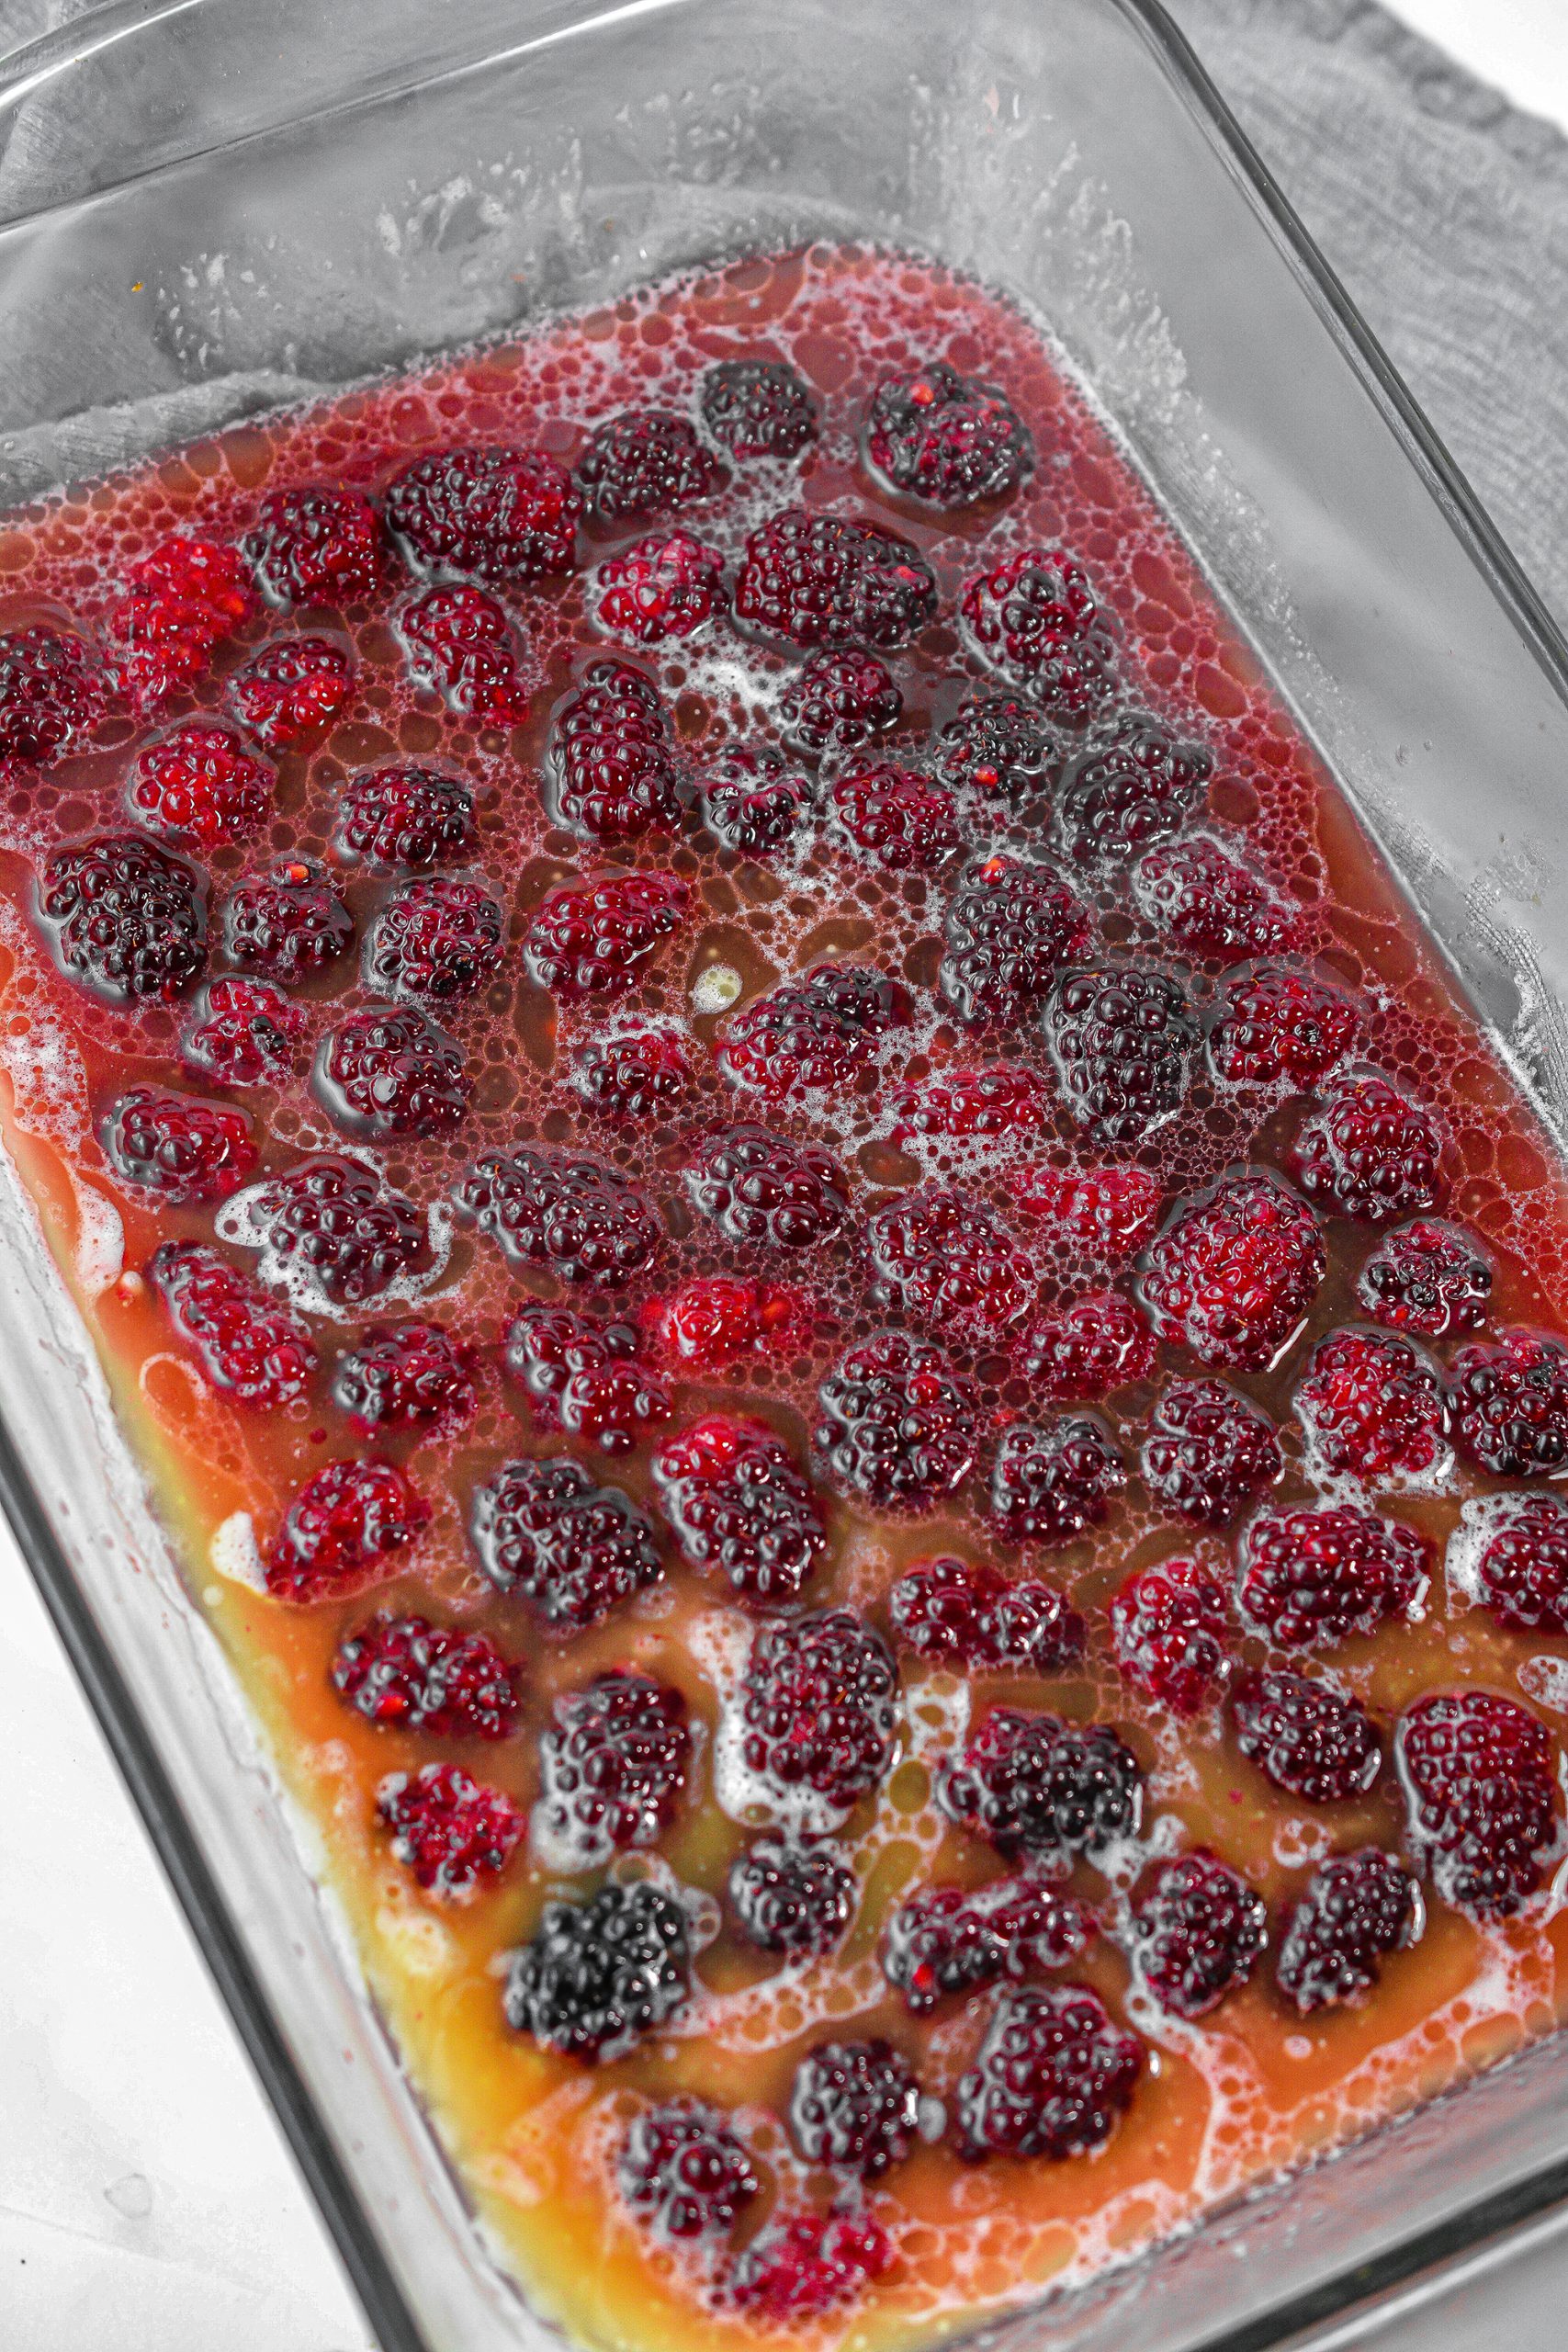 Add the berry mixture to the baking dish.